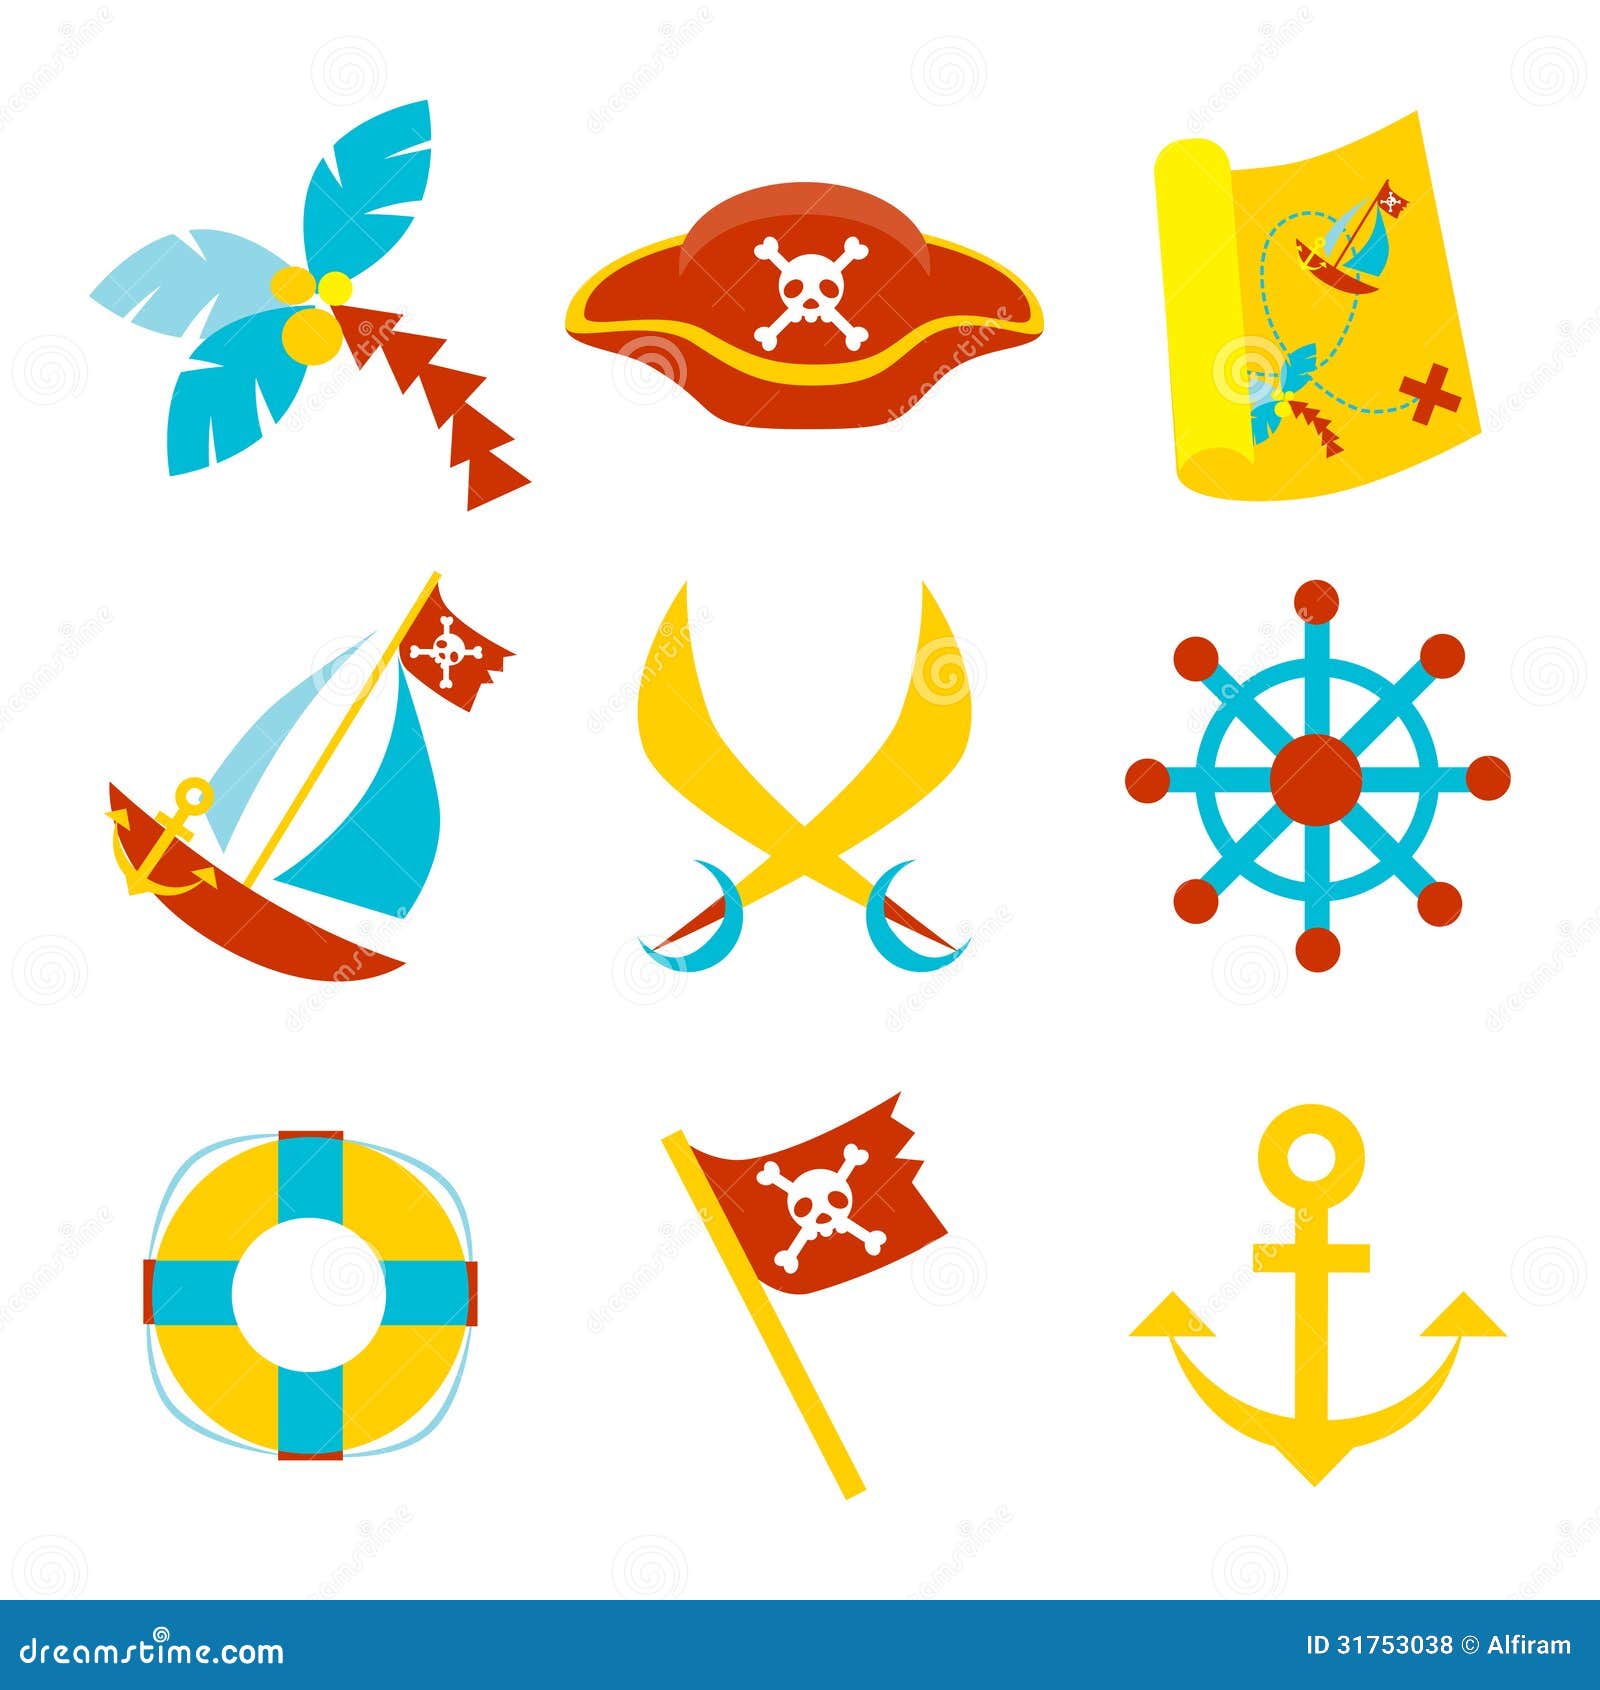 royalty free icons and clipart stock images - photo #21